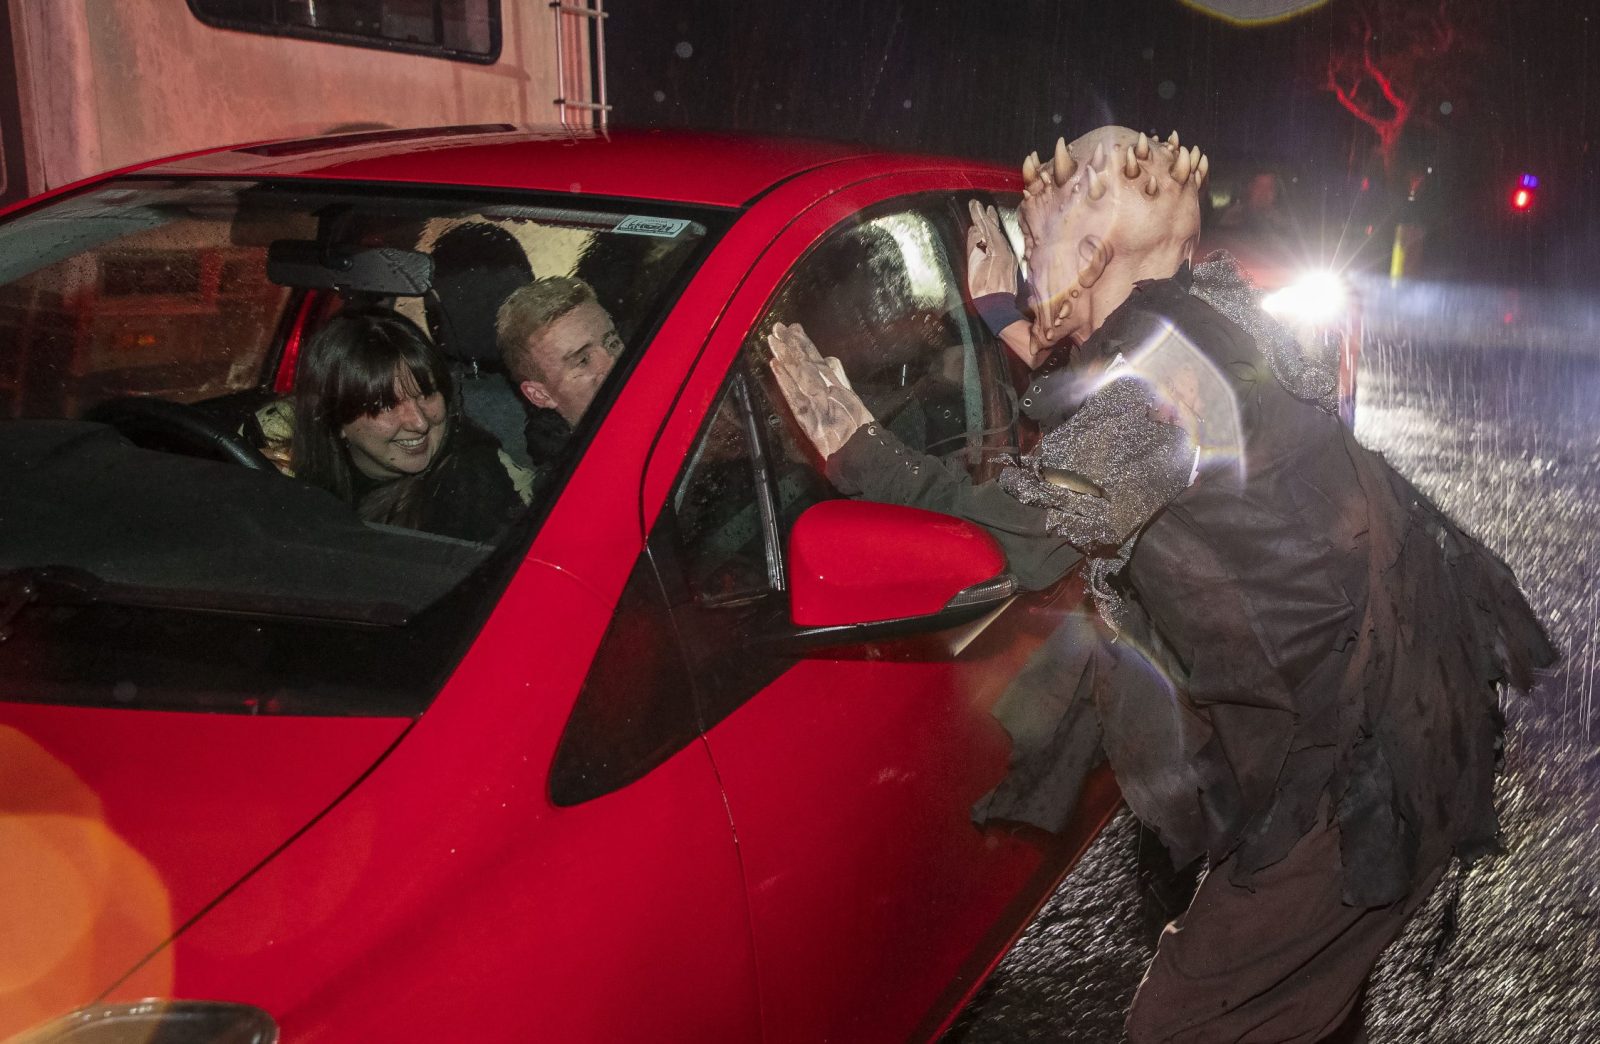 28 Days Later, Insidious, and more on at drive-in cinema inside abandoned theme park, The Manc